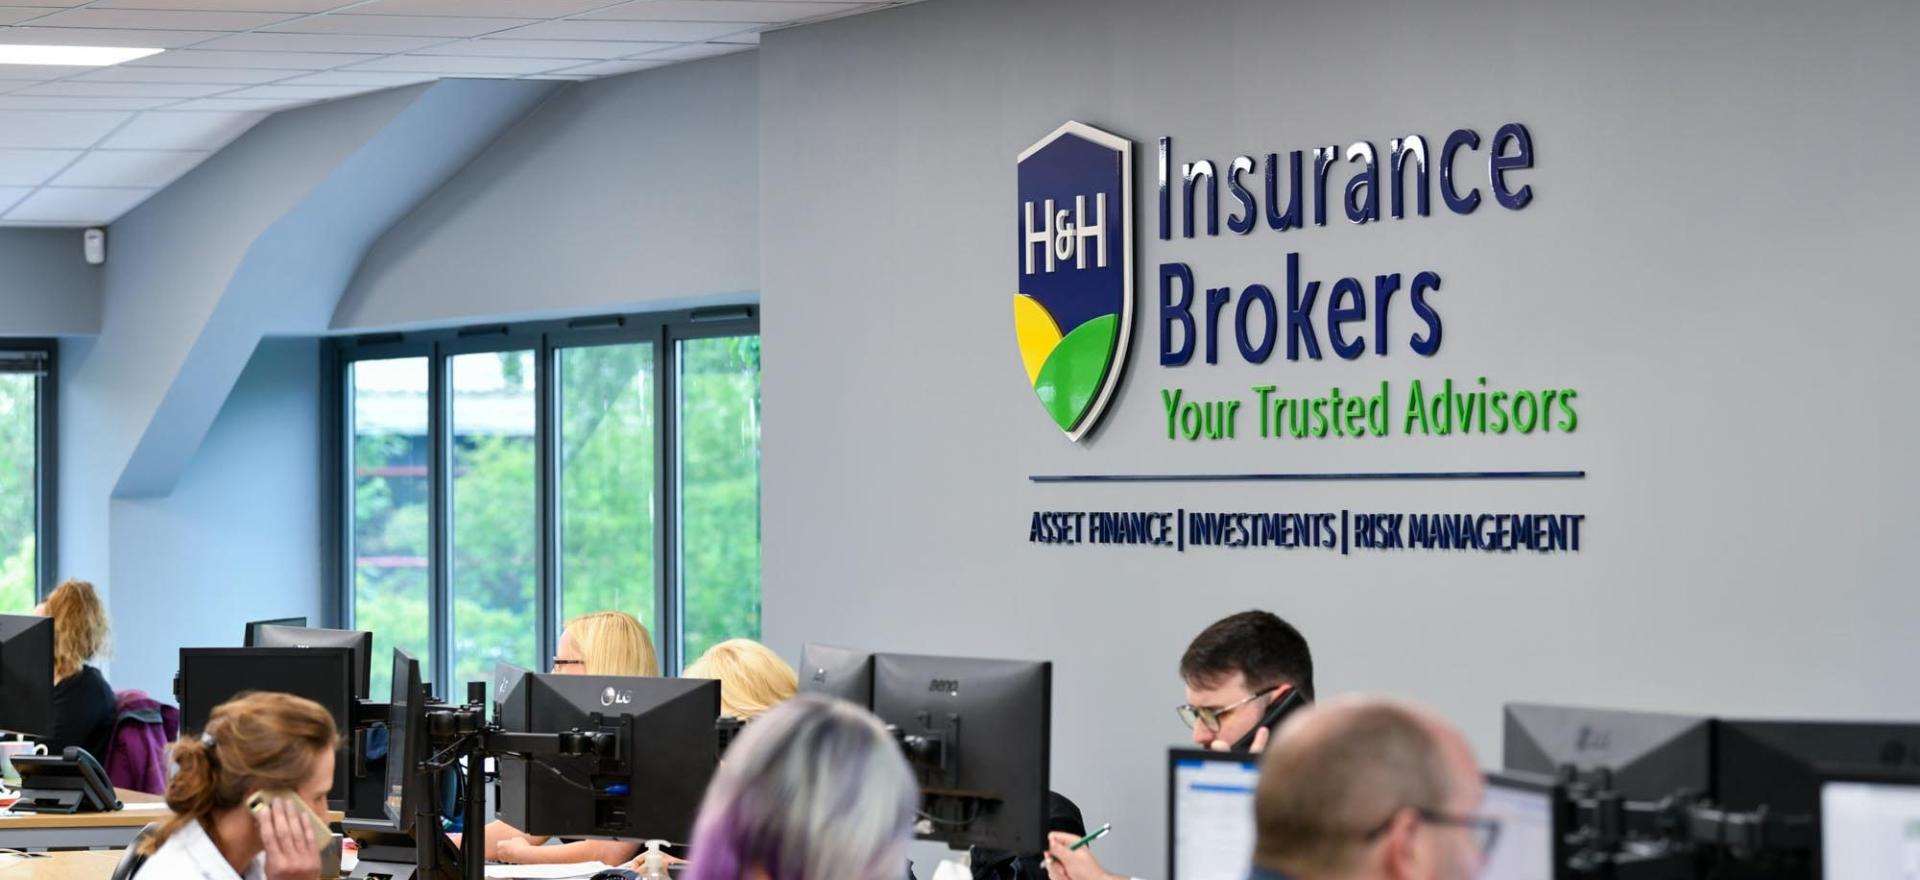 Image of inside H&H Insurance Carlisle offices looking at a large sign onn the wall